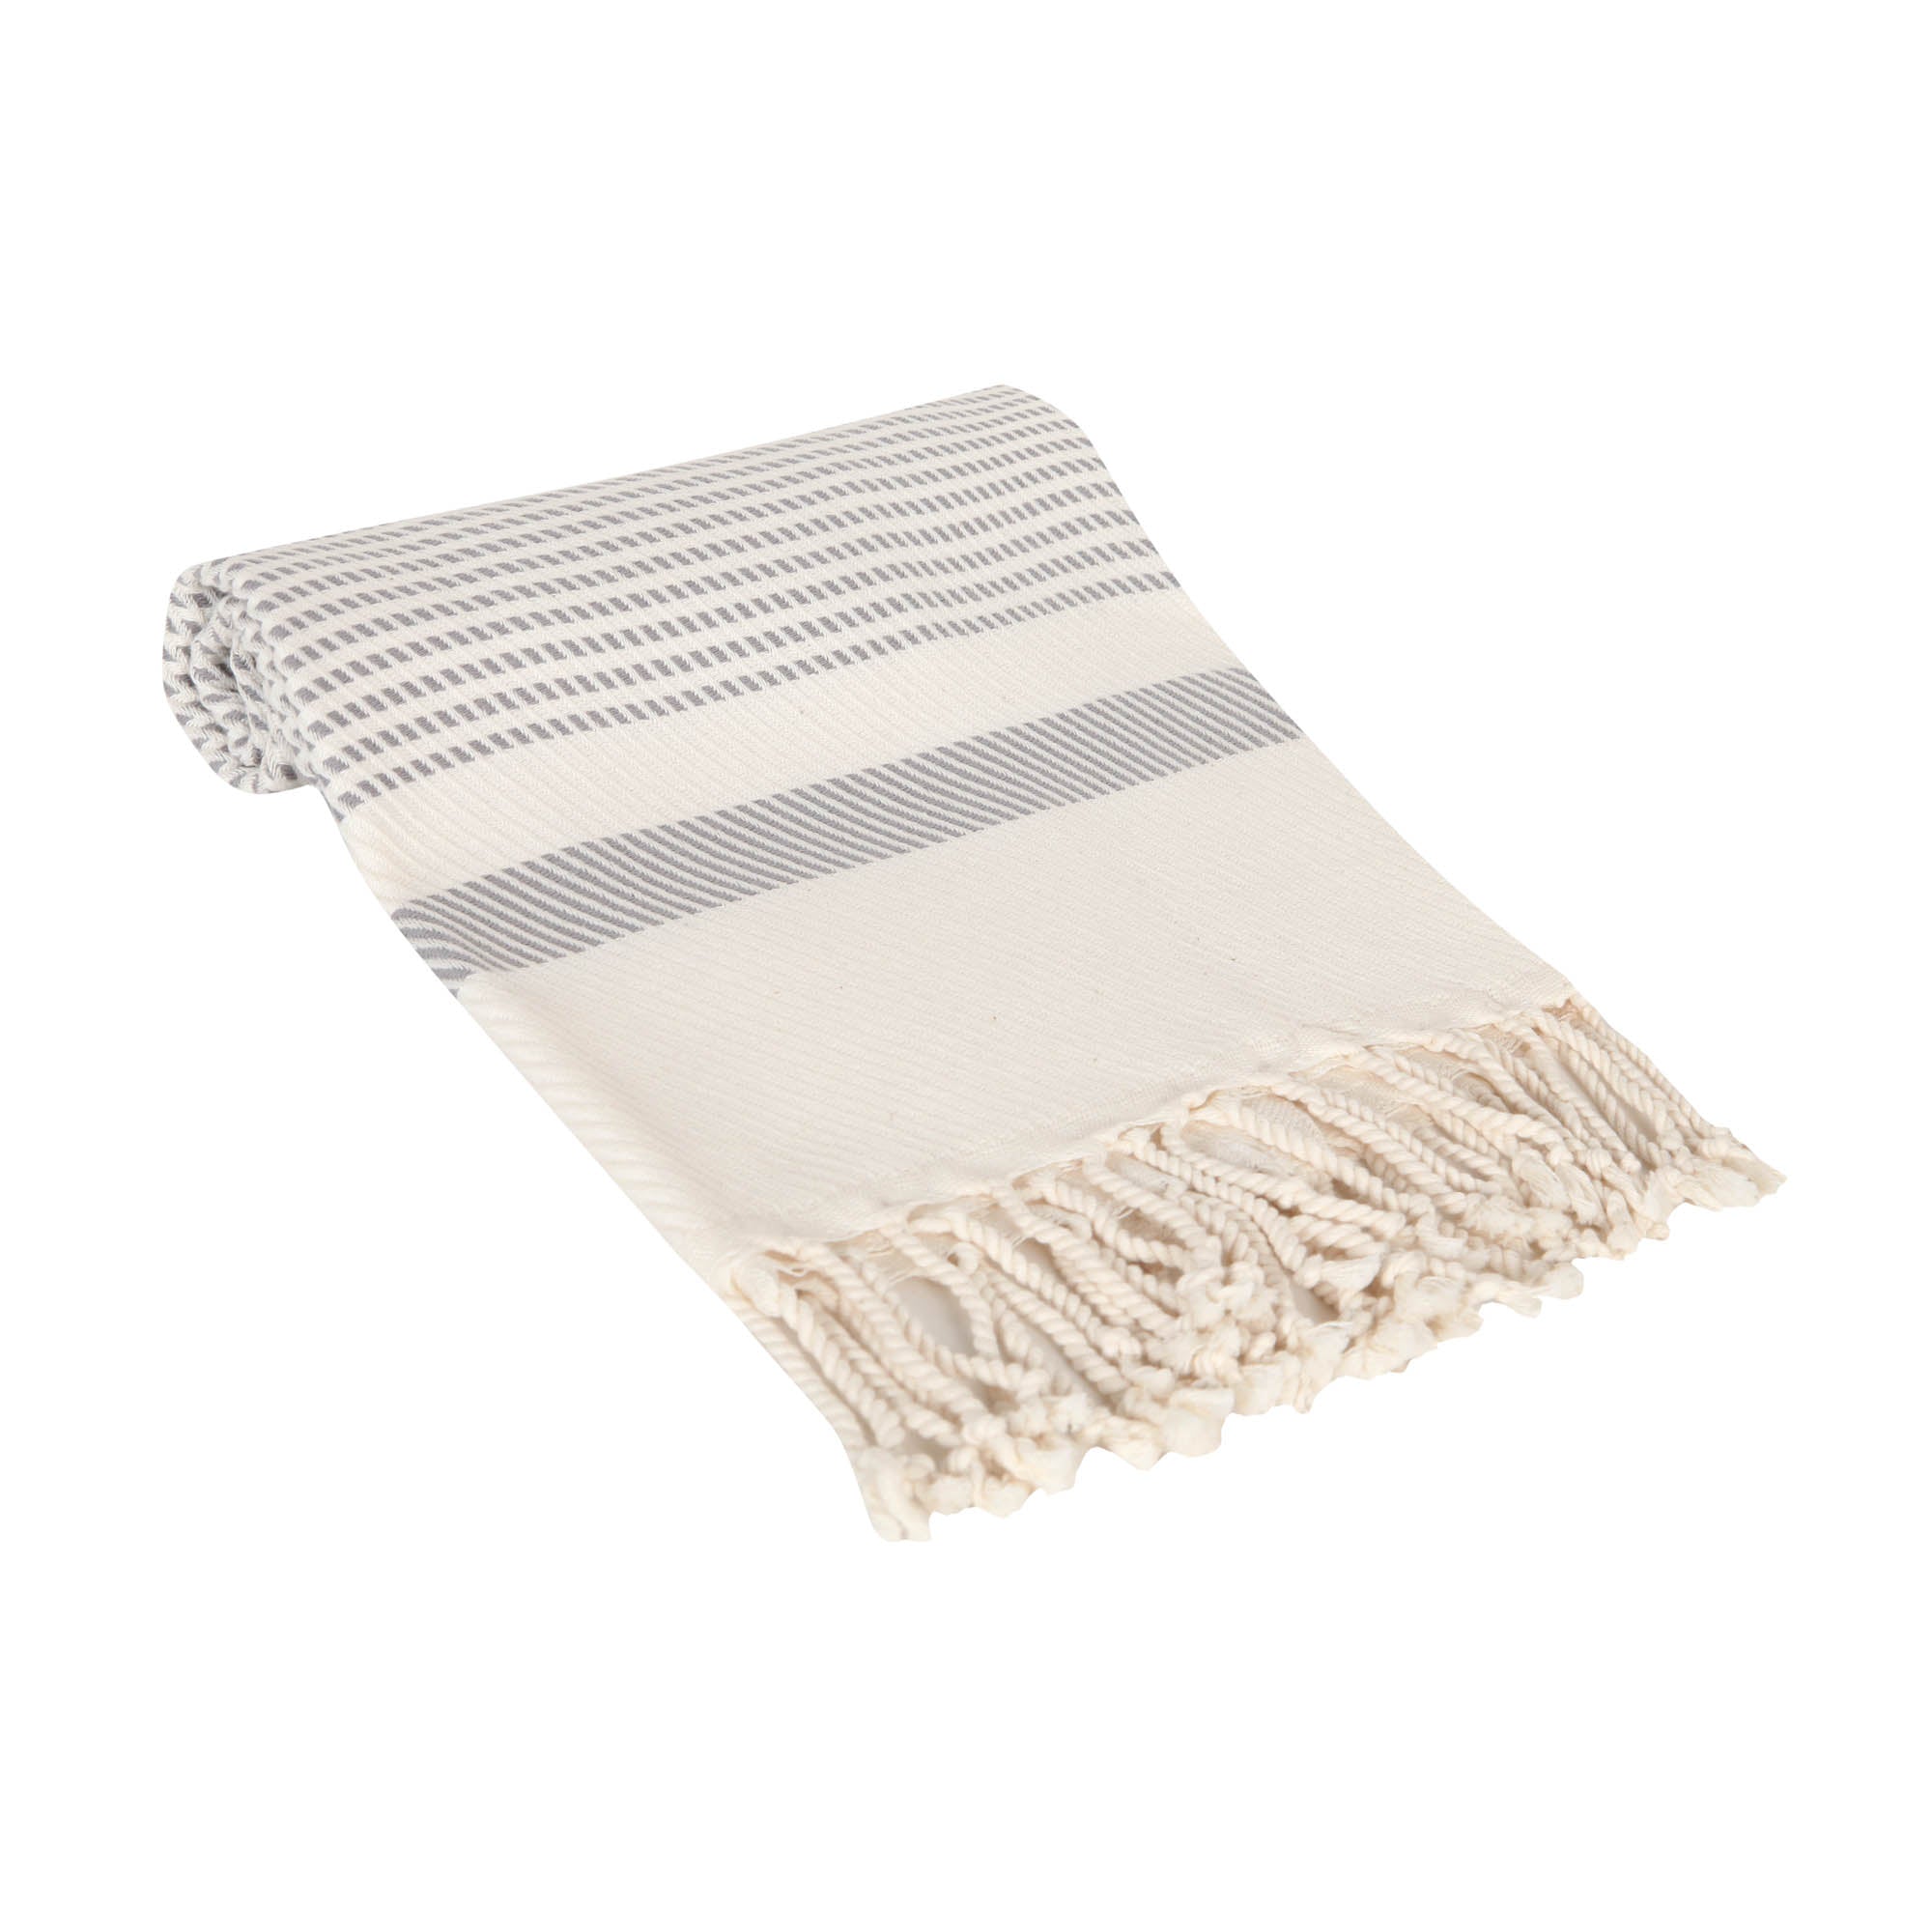 The Pixel Turkish Hand / Kitchen Towel - Olive and Linen